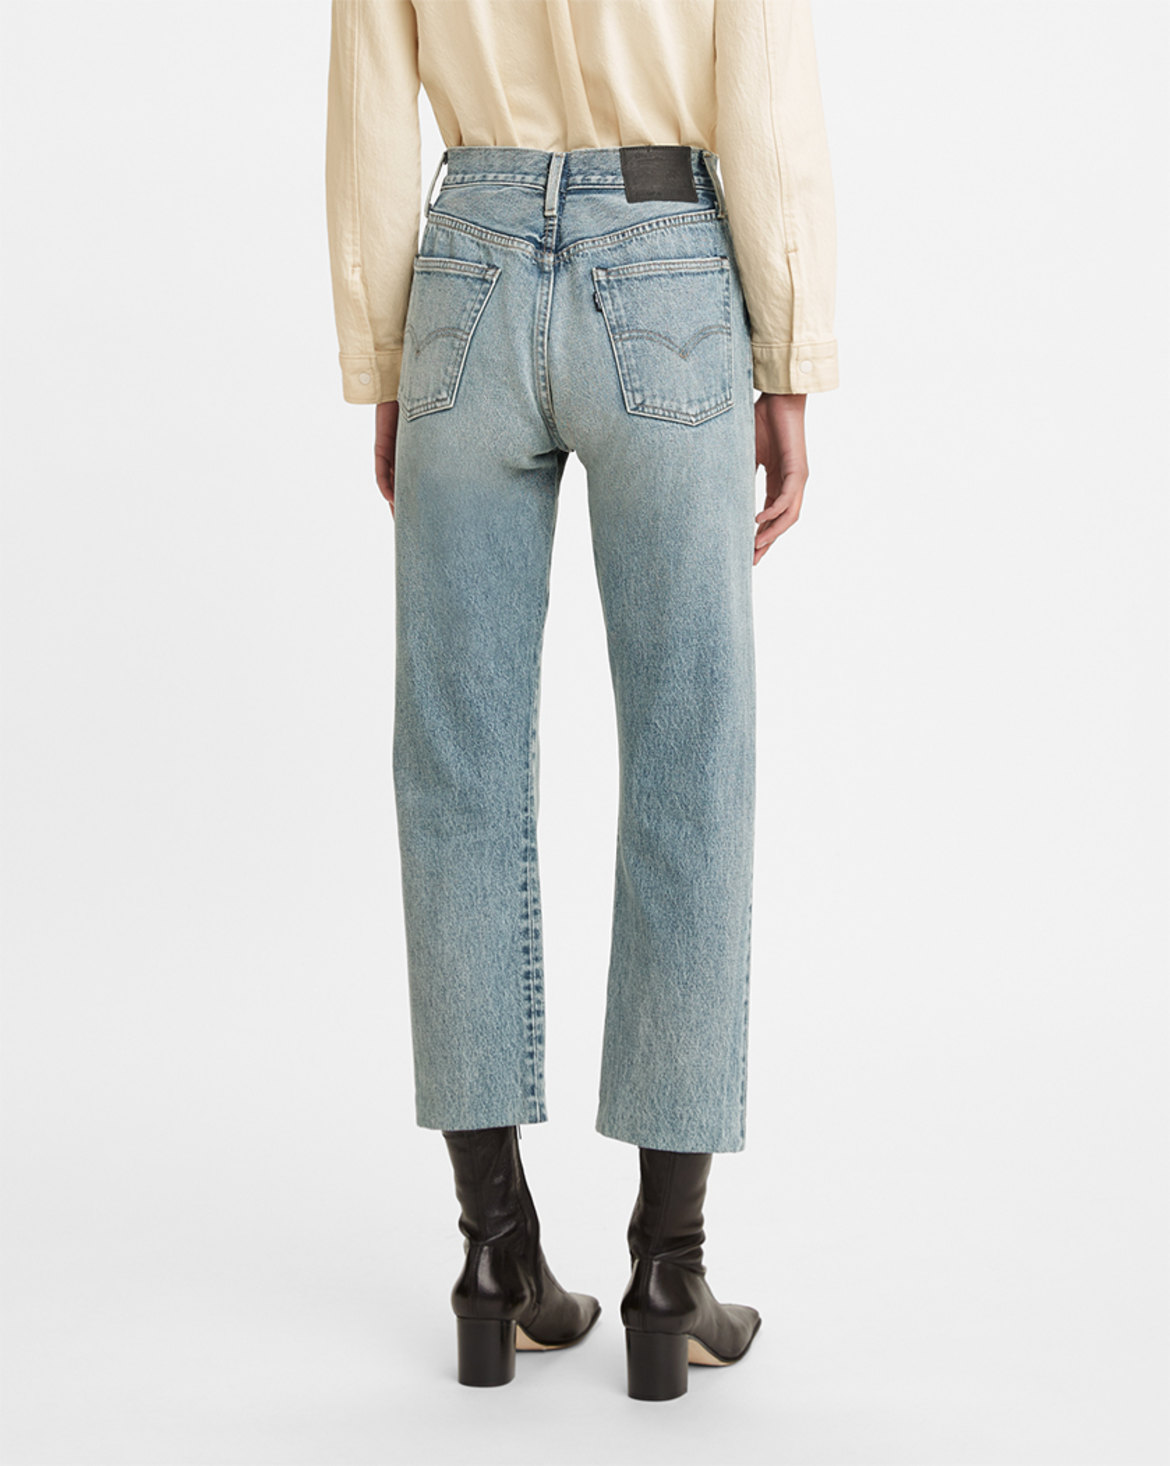 Levi's® Made & Crafted® Women's 501® Original Selvedge Cropped Jeans | Levi